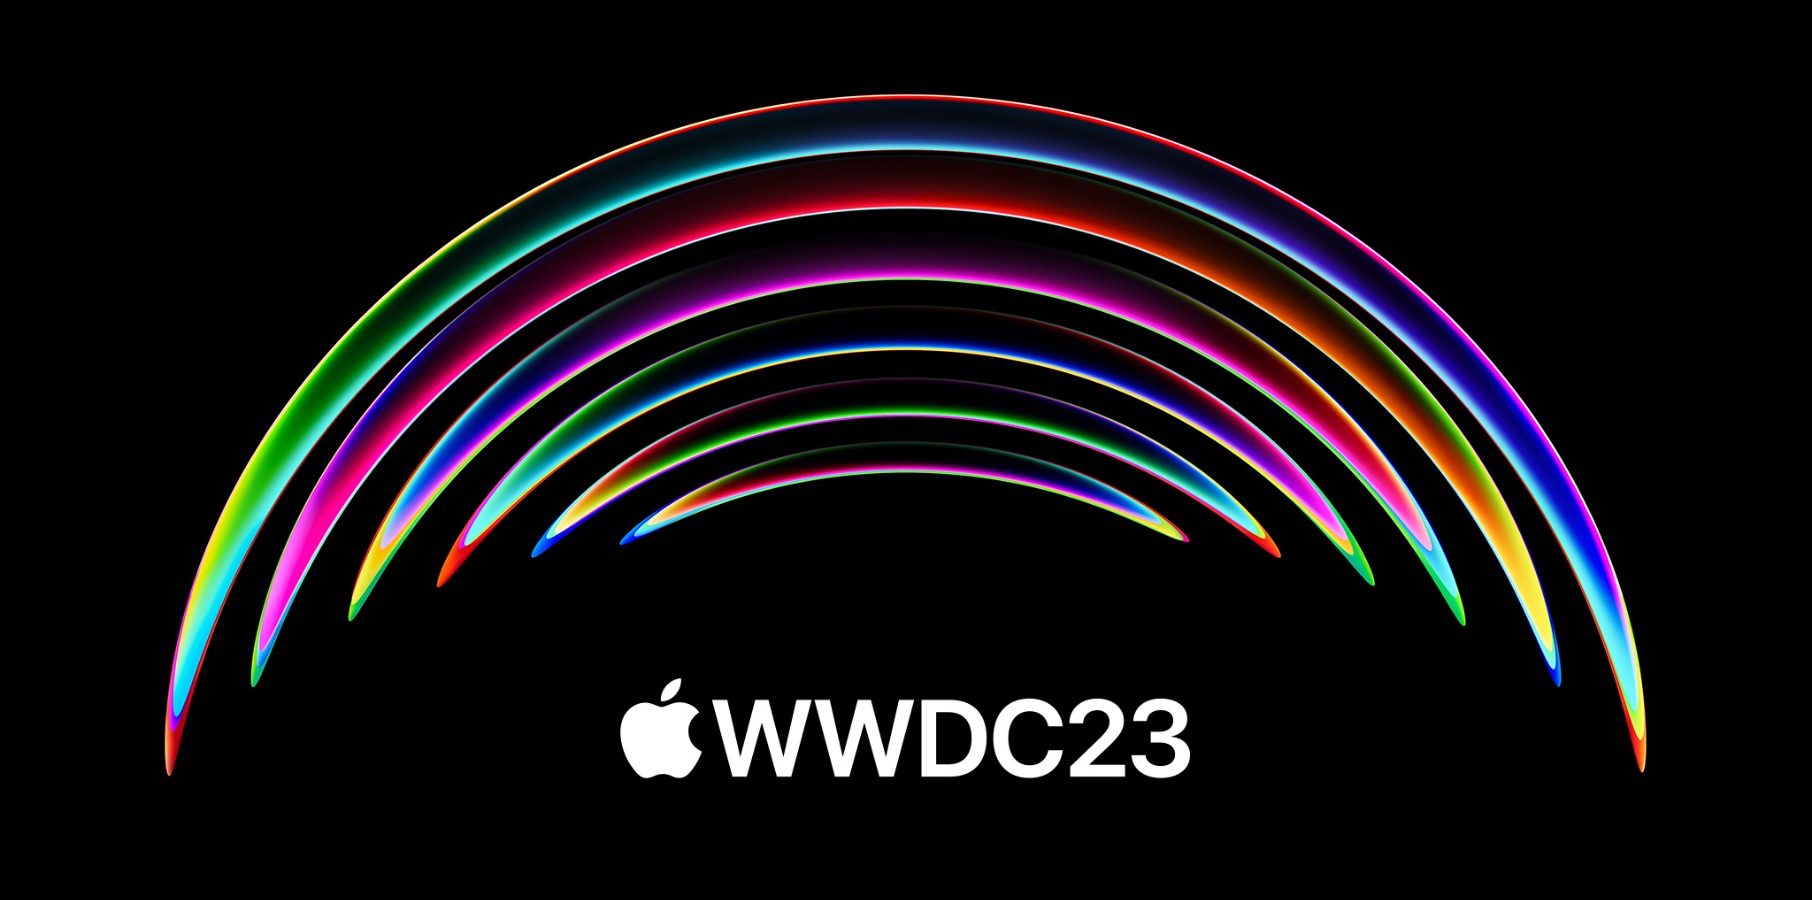 Get Ready for the Latest iOS, iPadOS, macOS, and Hardware Updates at Apple's WWDC 2023! 15